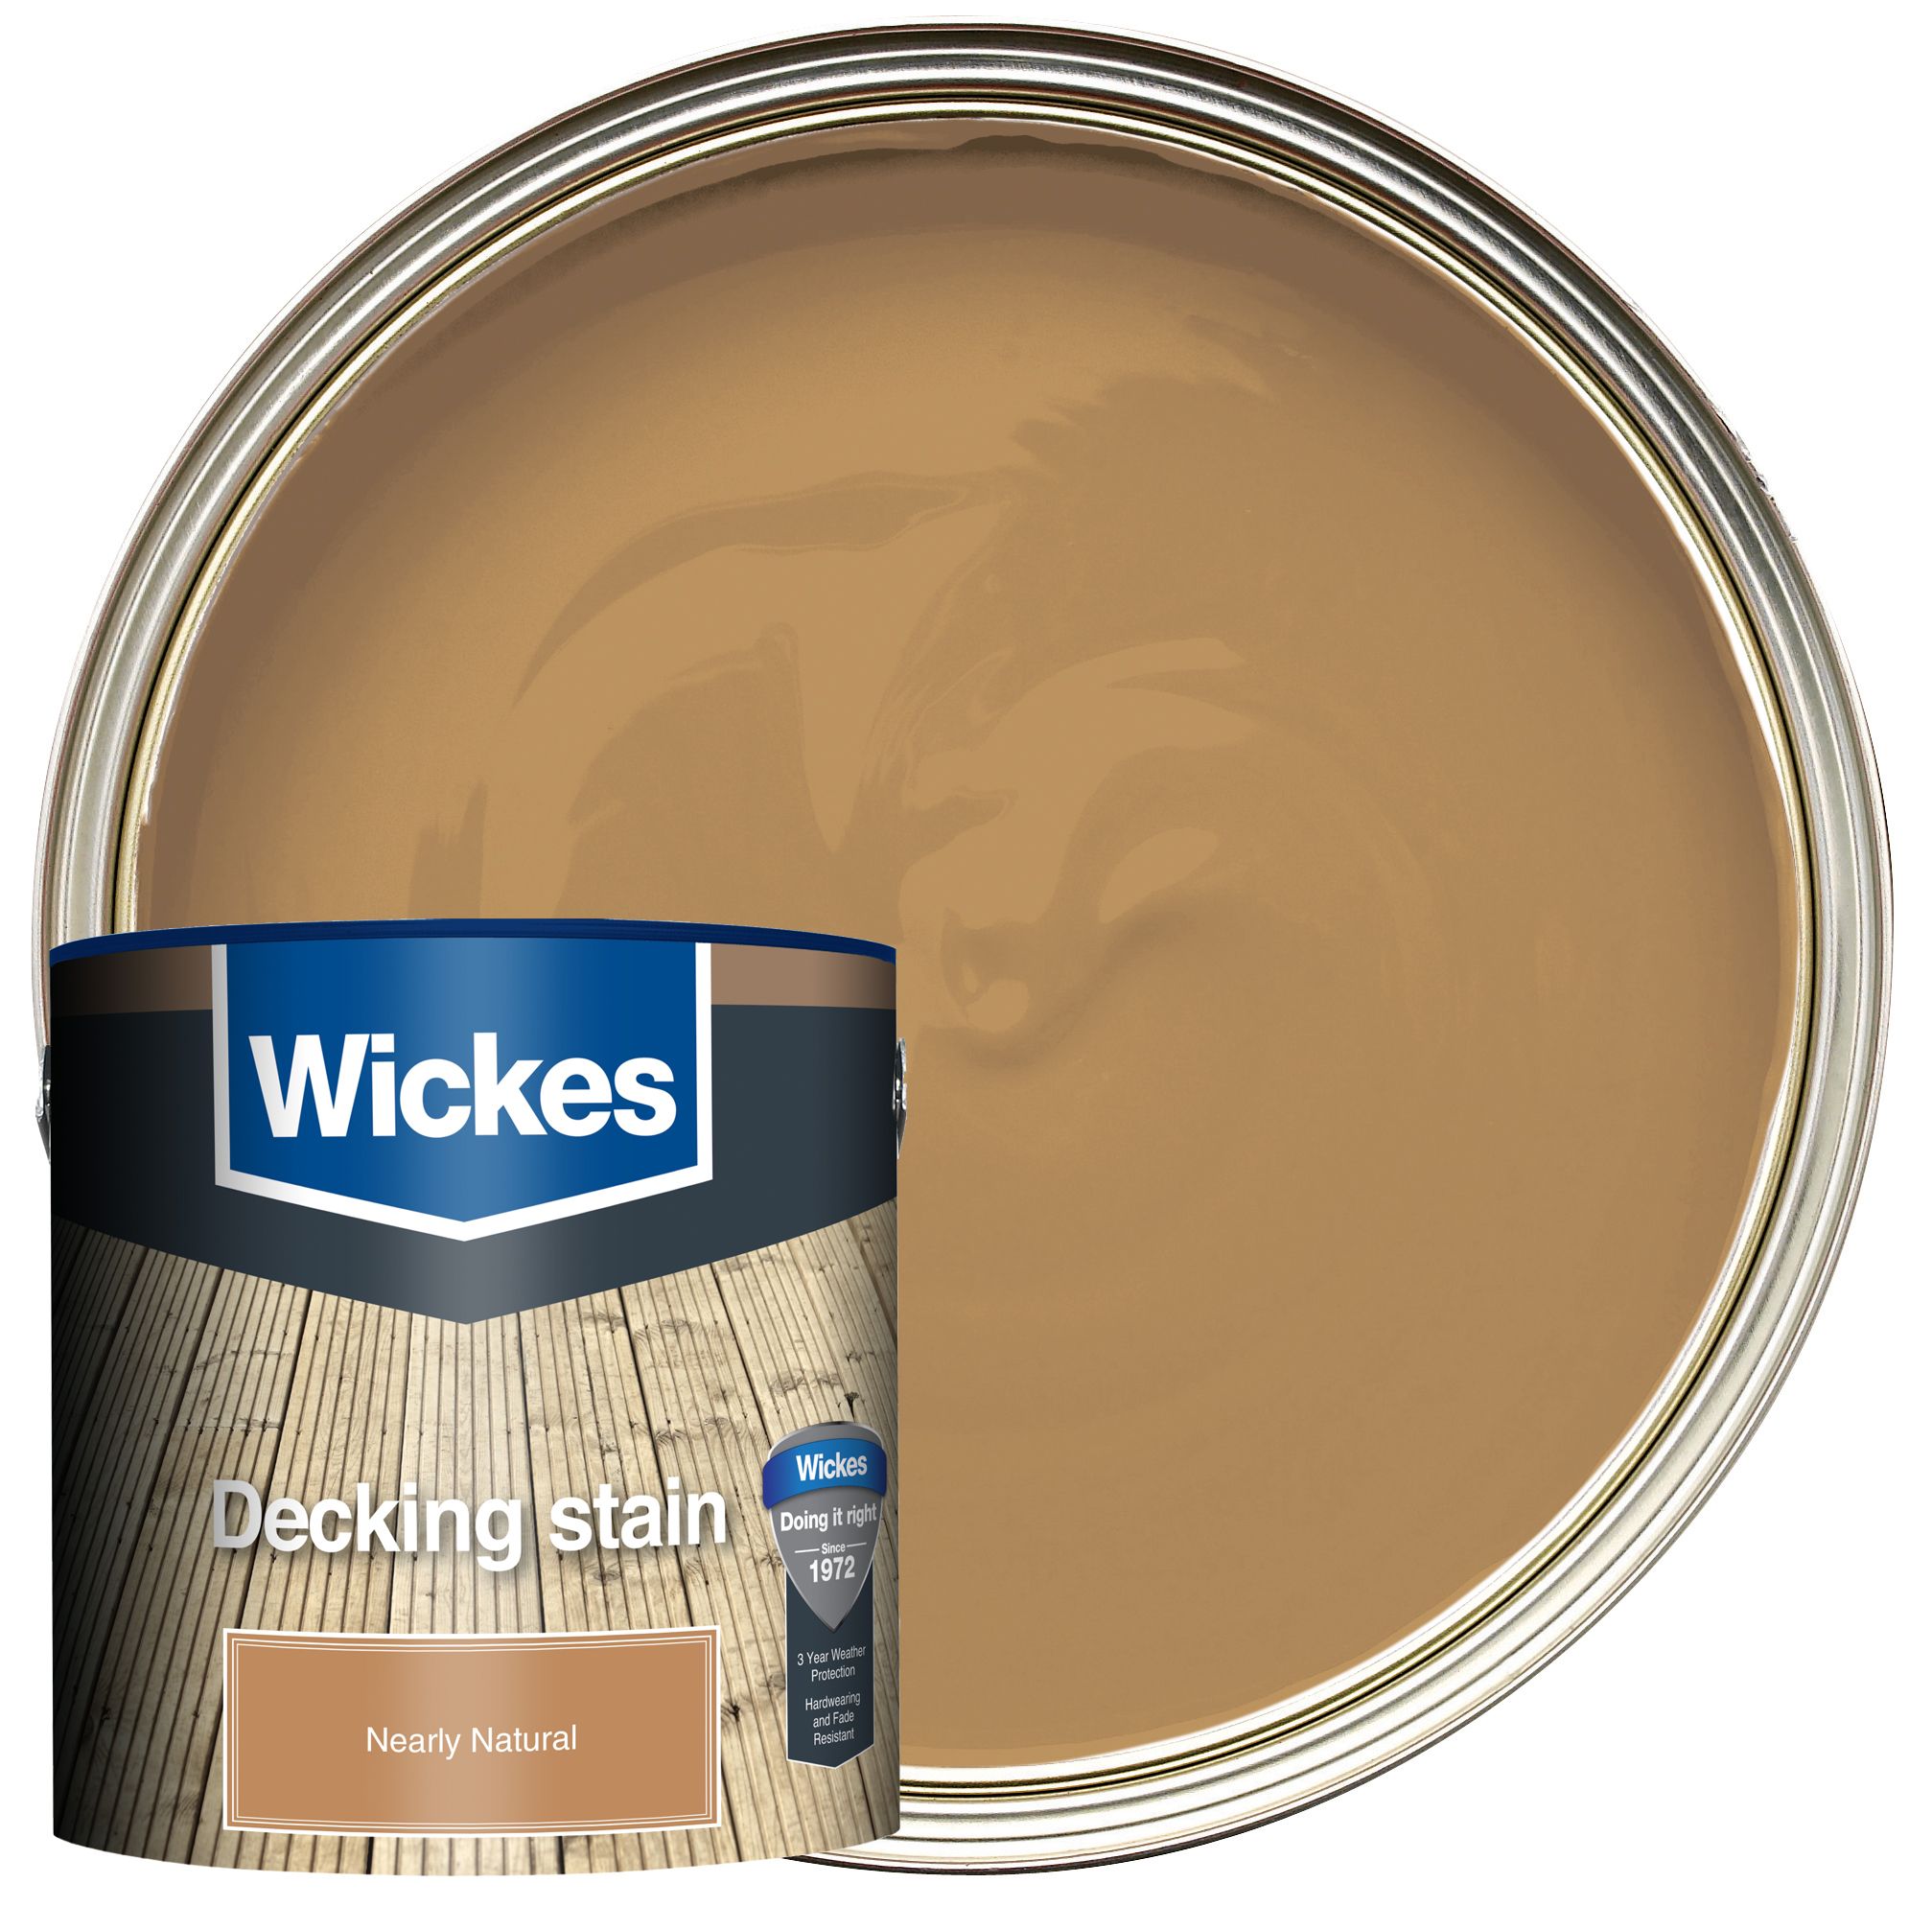 Image of Wickes Decking Stain - Nearly Natural 2.5L